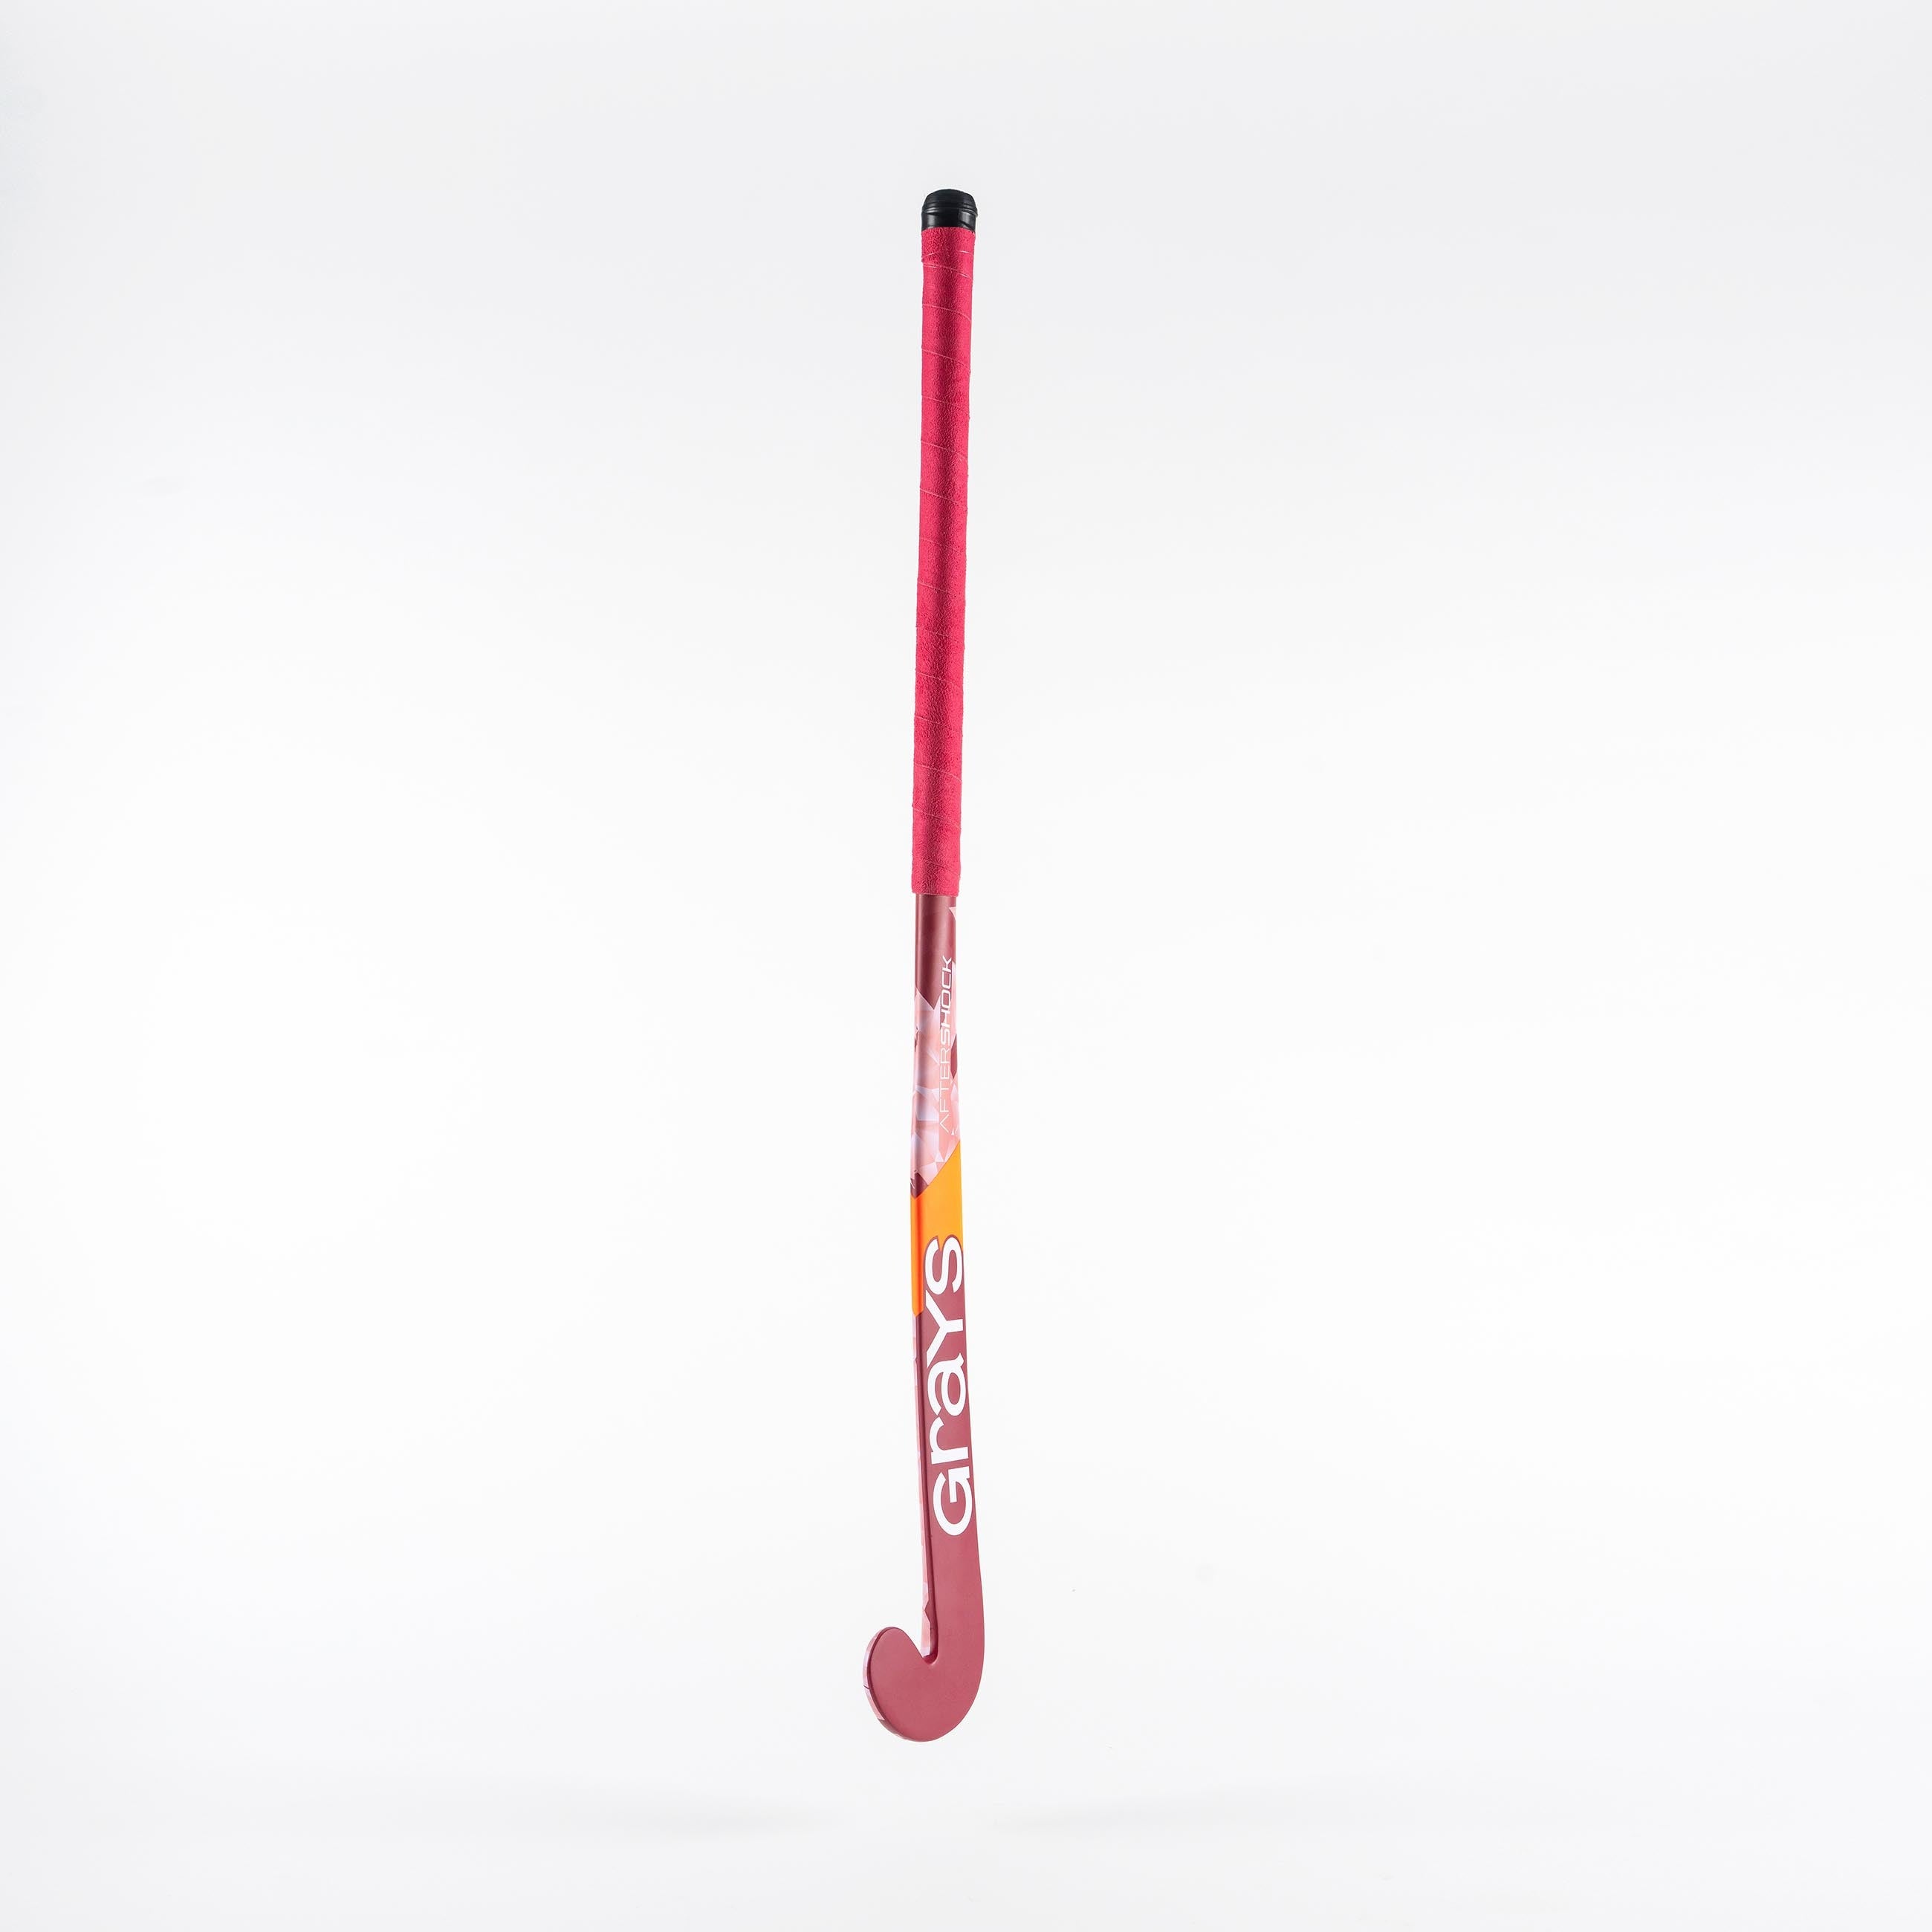 HBBA24Wooden Sticks Aftershock UB Pink Red 2 Angle